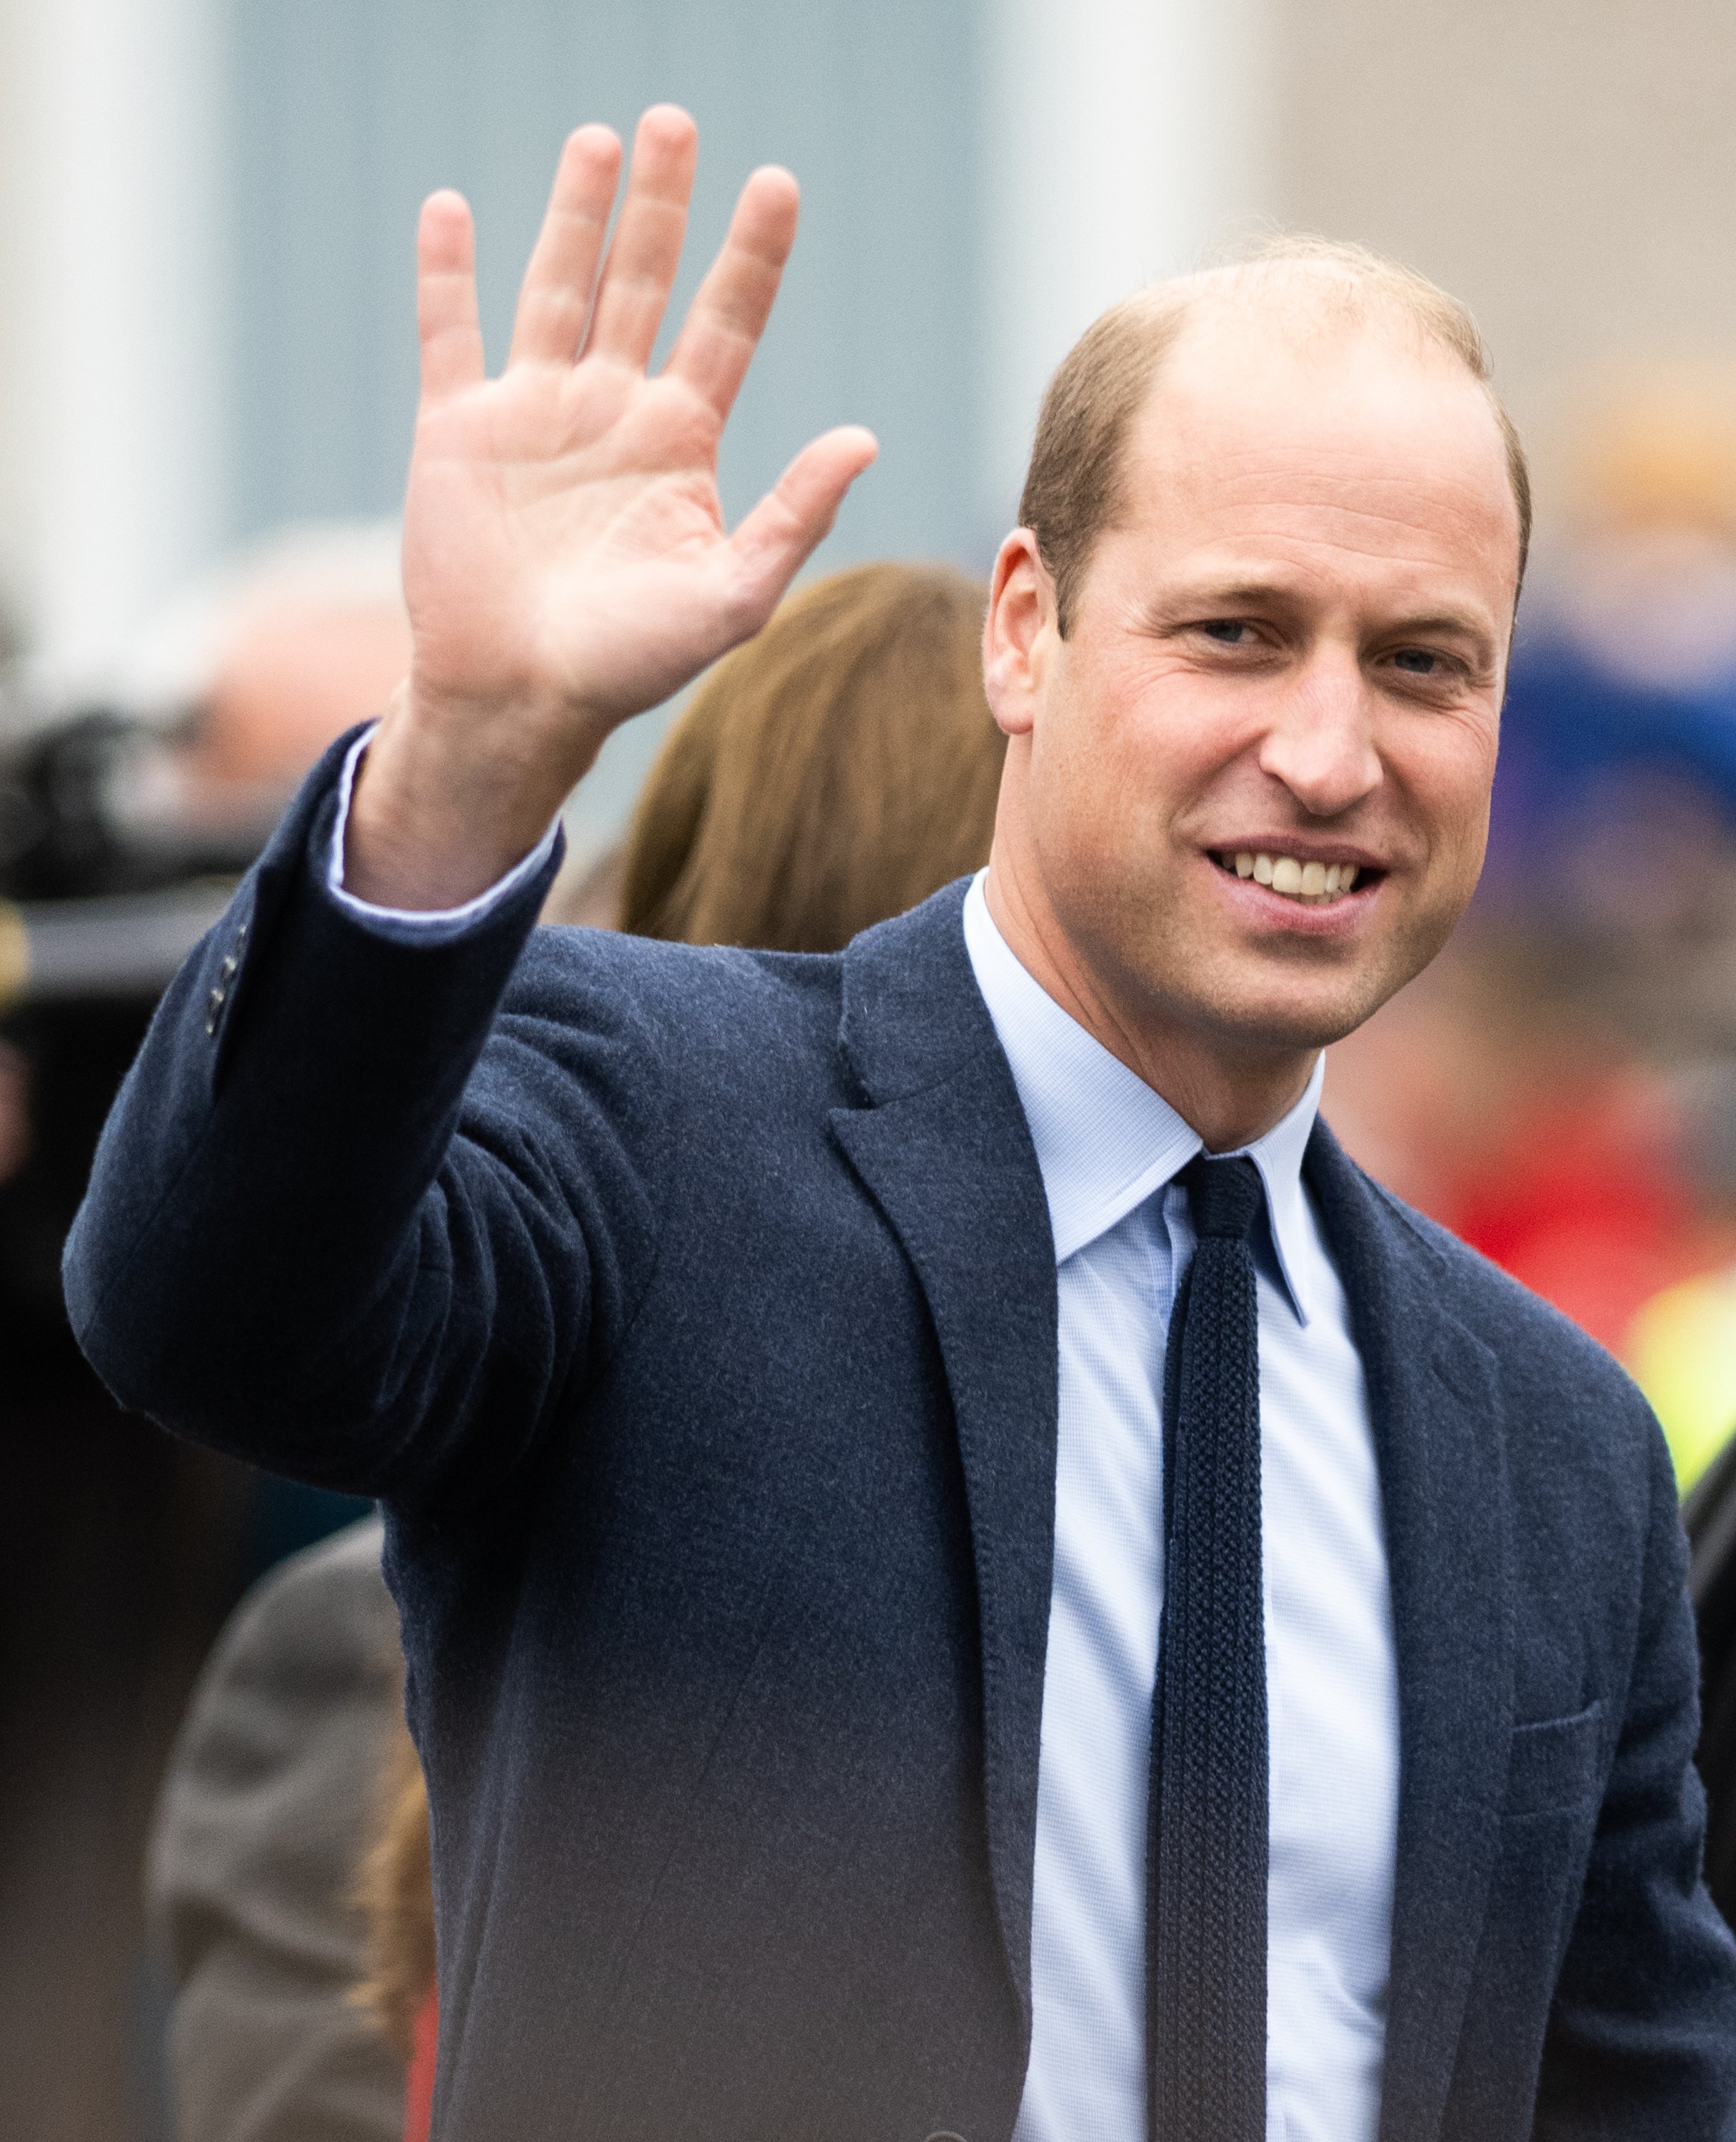 Prince William, Prince of Wales during a visit to Wales on September 27, 2022 in Swansea, Wales  | Source: Getty Images